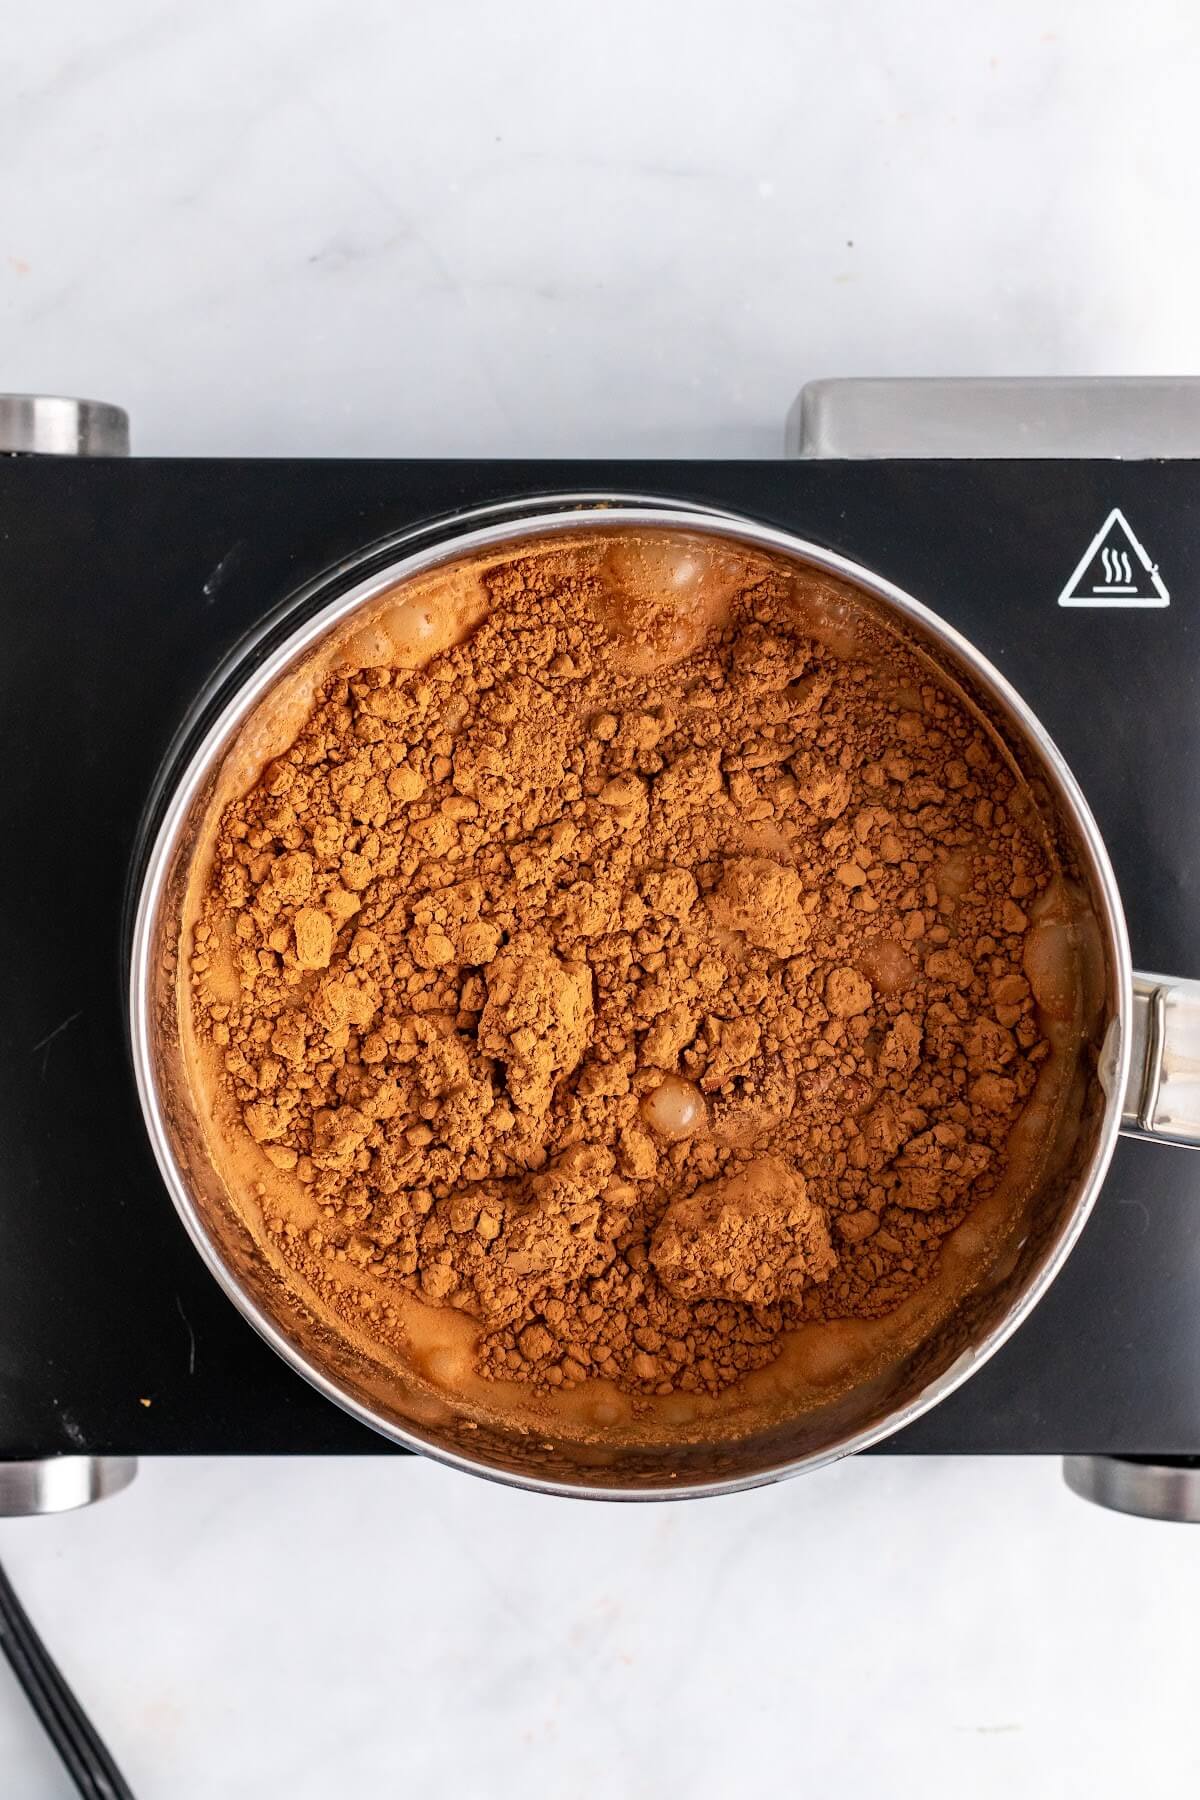 Saucepan filled with liquid and cocoa powder covering the liquid sitting on top of a stovetop.